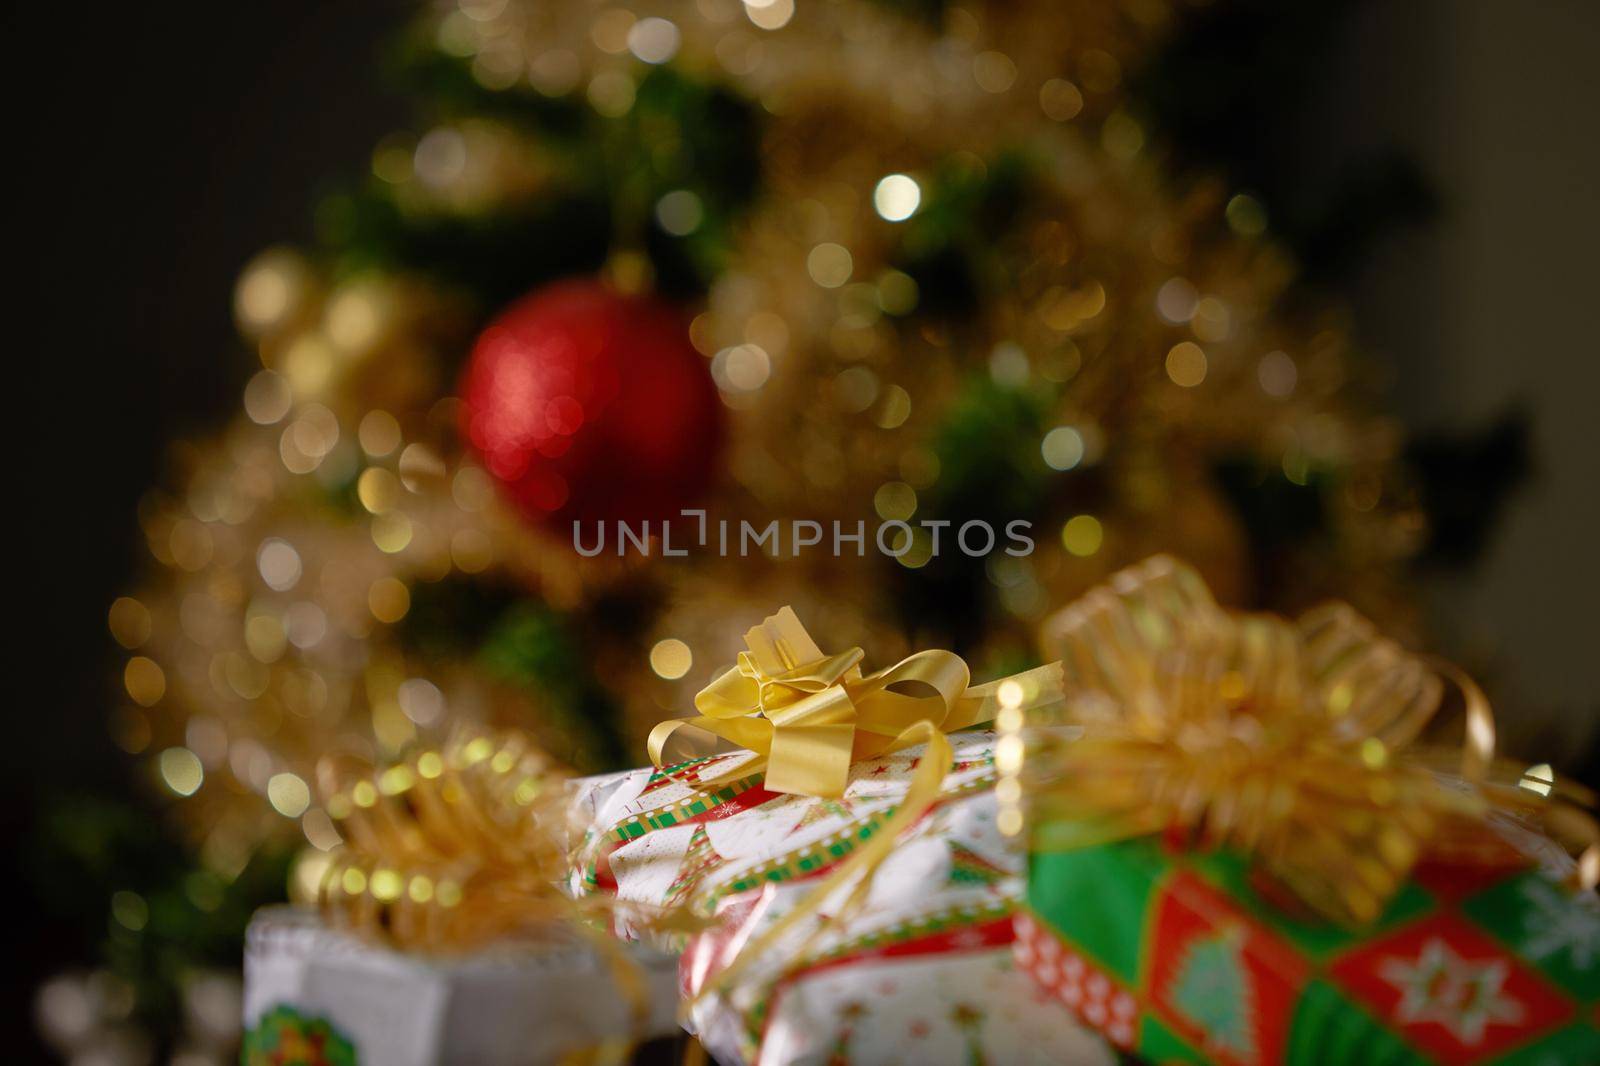 Stacks of Christmas Presents Under a Christmas Tree with Defocused Lights by wondry